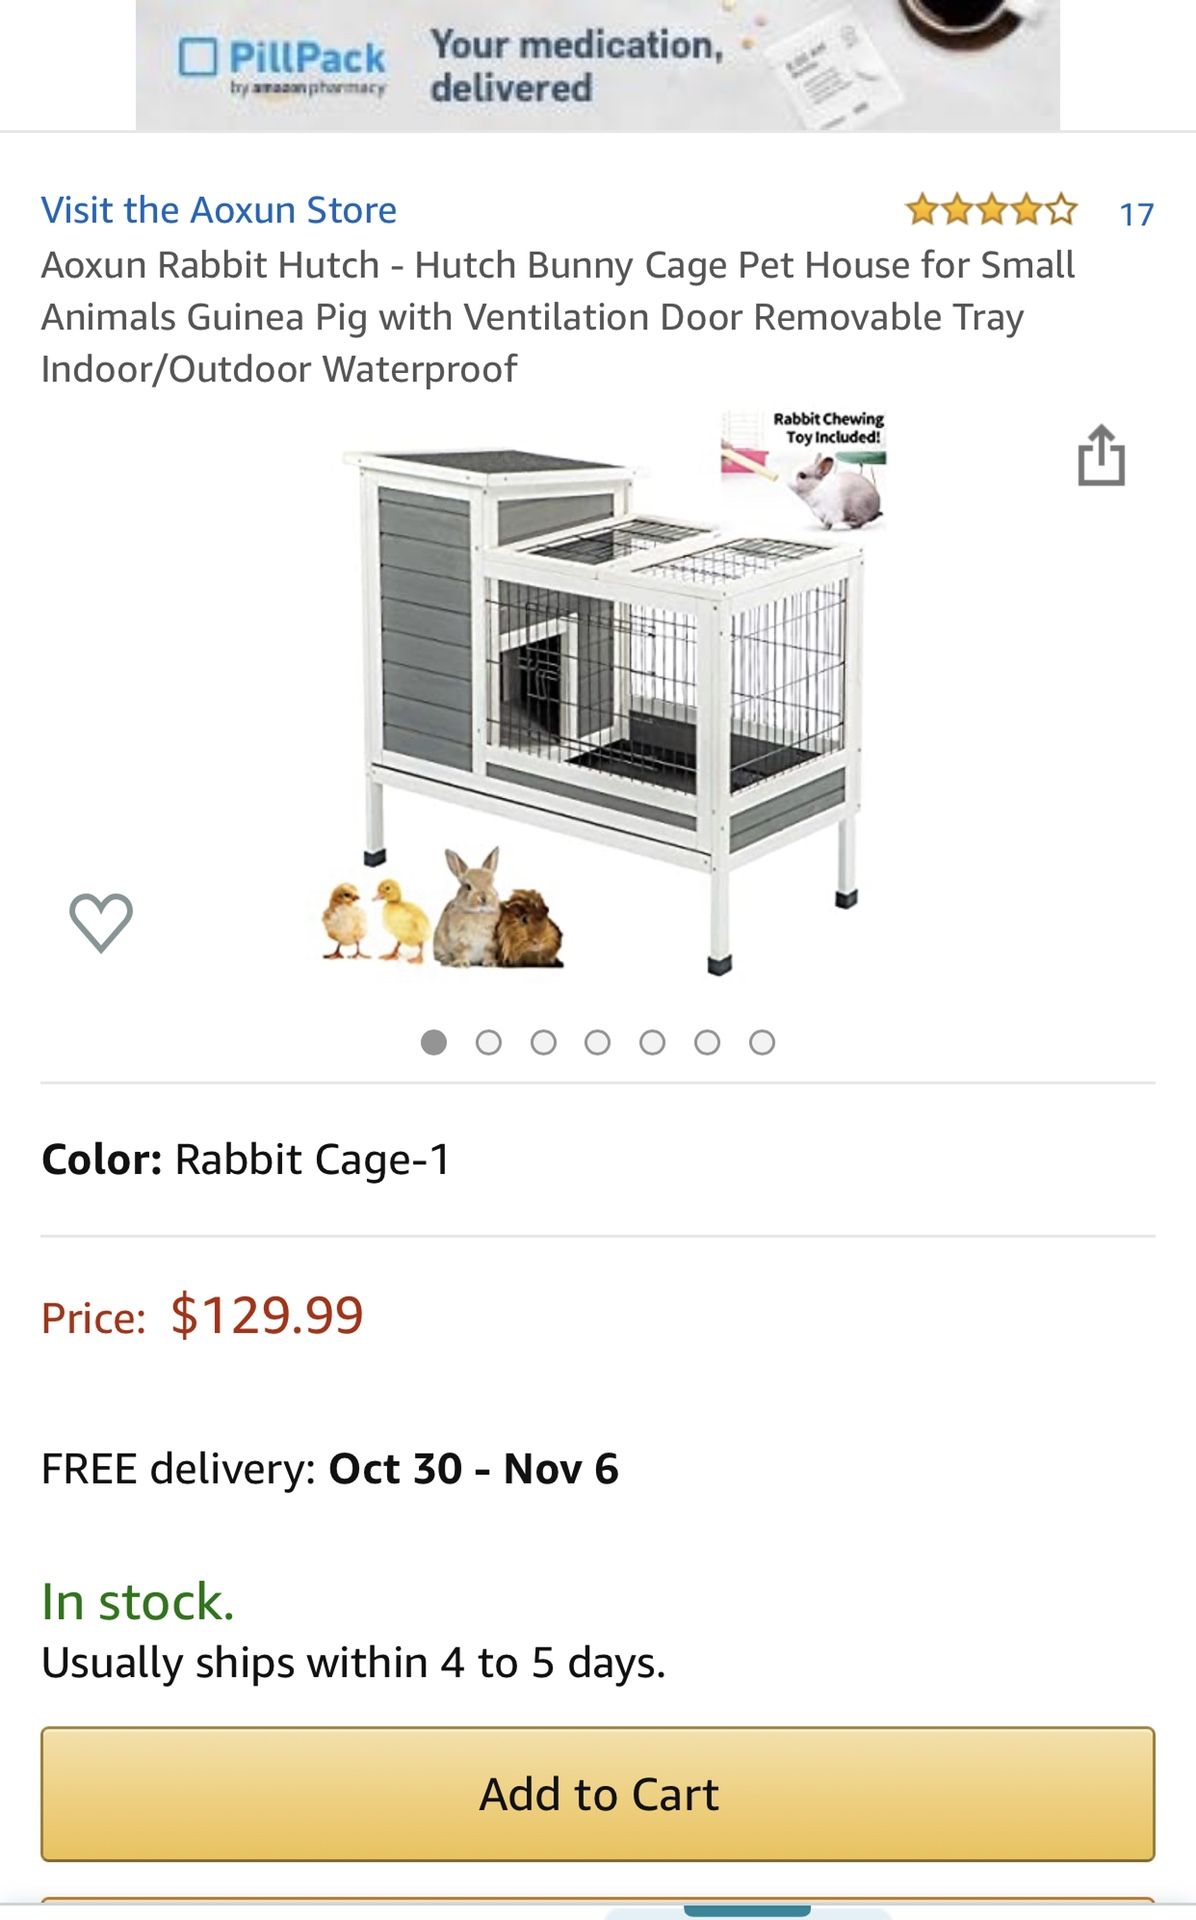 Aoxun Rabbit Hutch - Hutch Bunny Cage Pet House for Small Animals Guinea Pig with Ventilation Door Removable Tray Indoor/Outdoor Waterproof